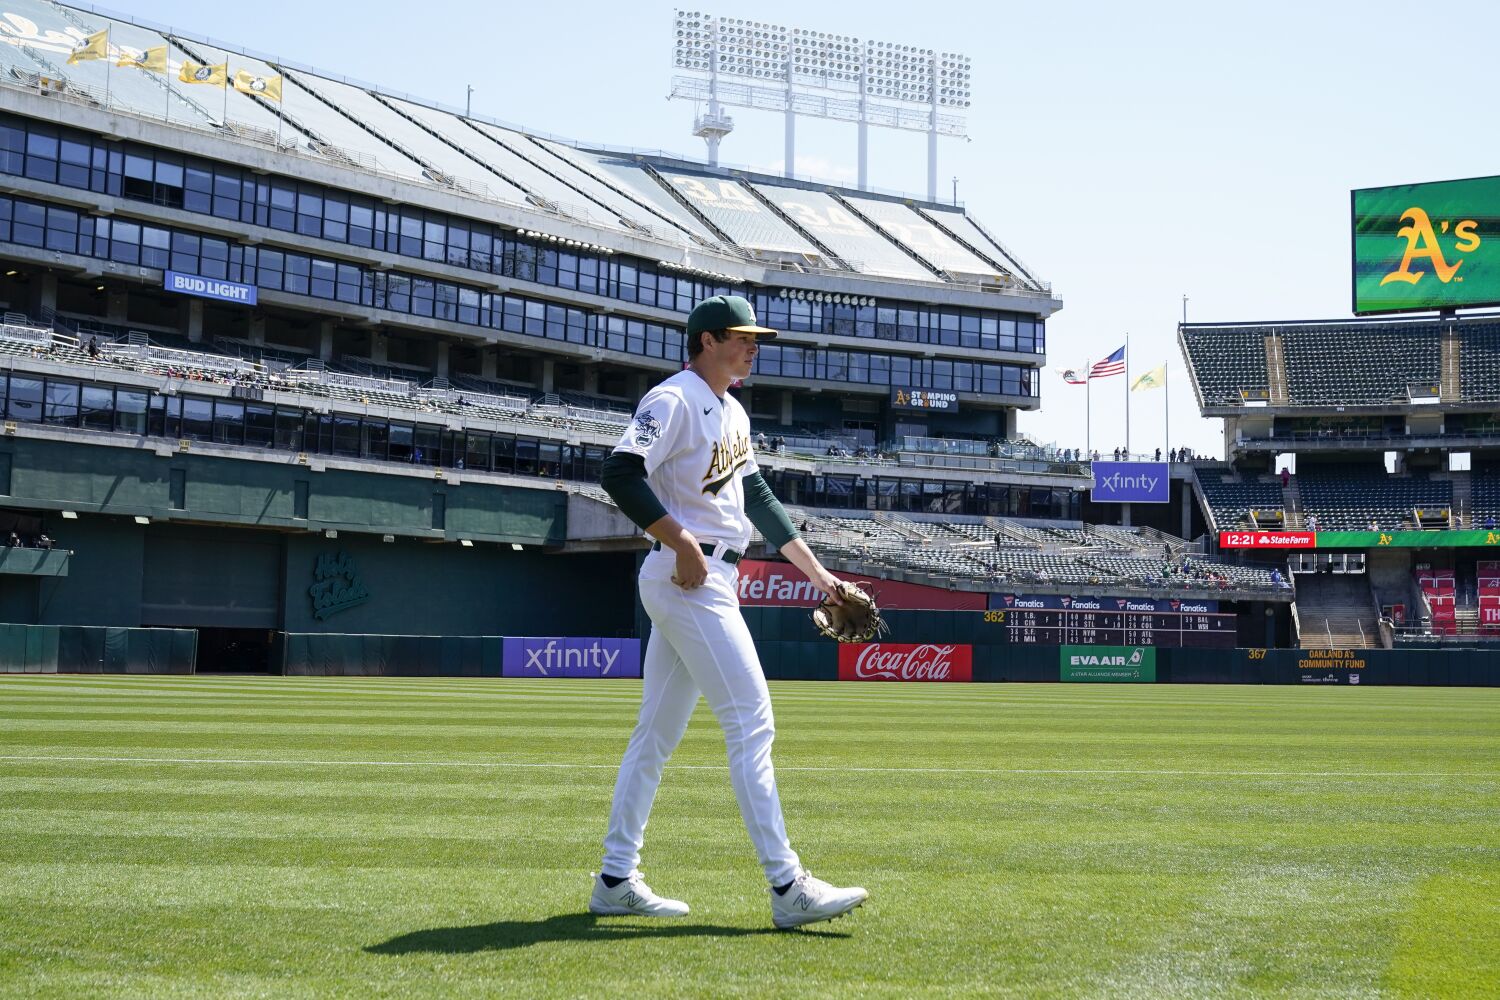 Shaikin: MLB and A's should do the right thing and keep team in Oakland